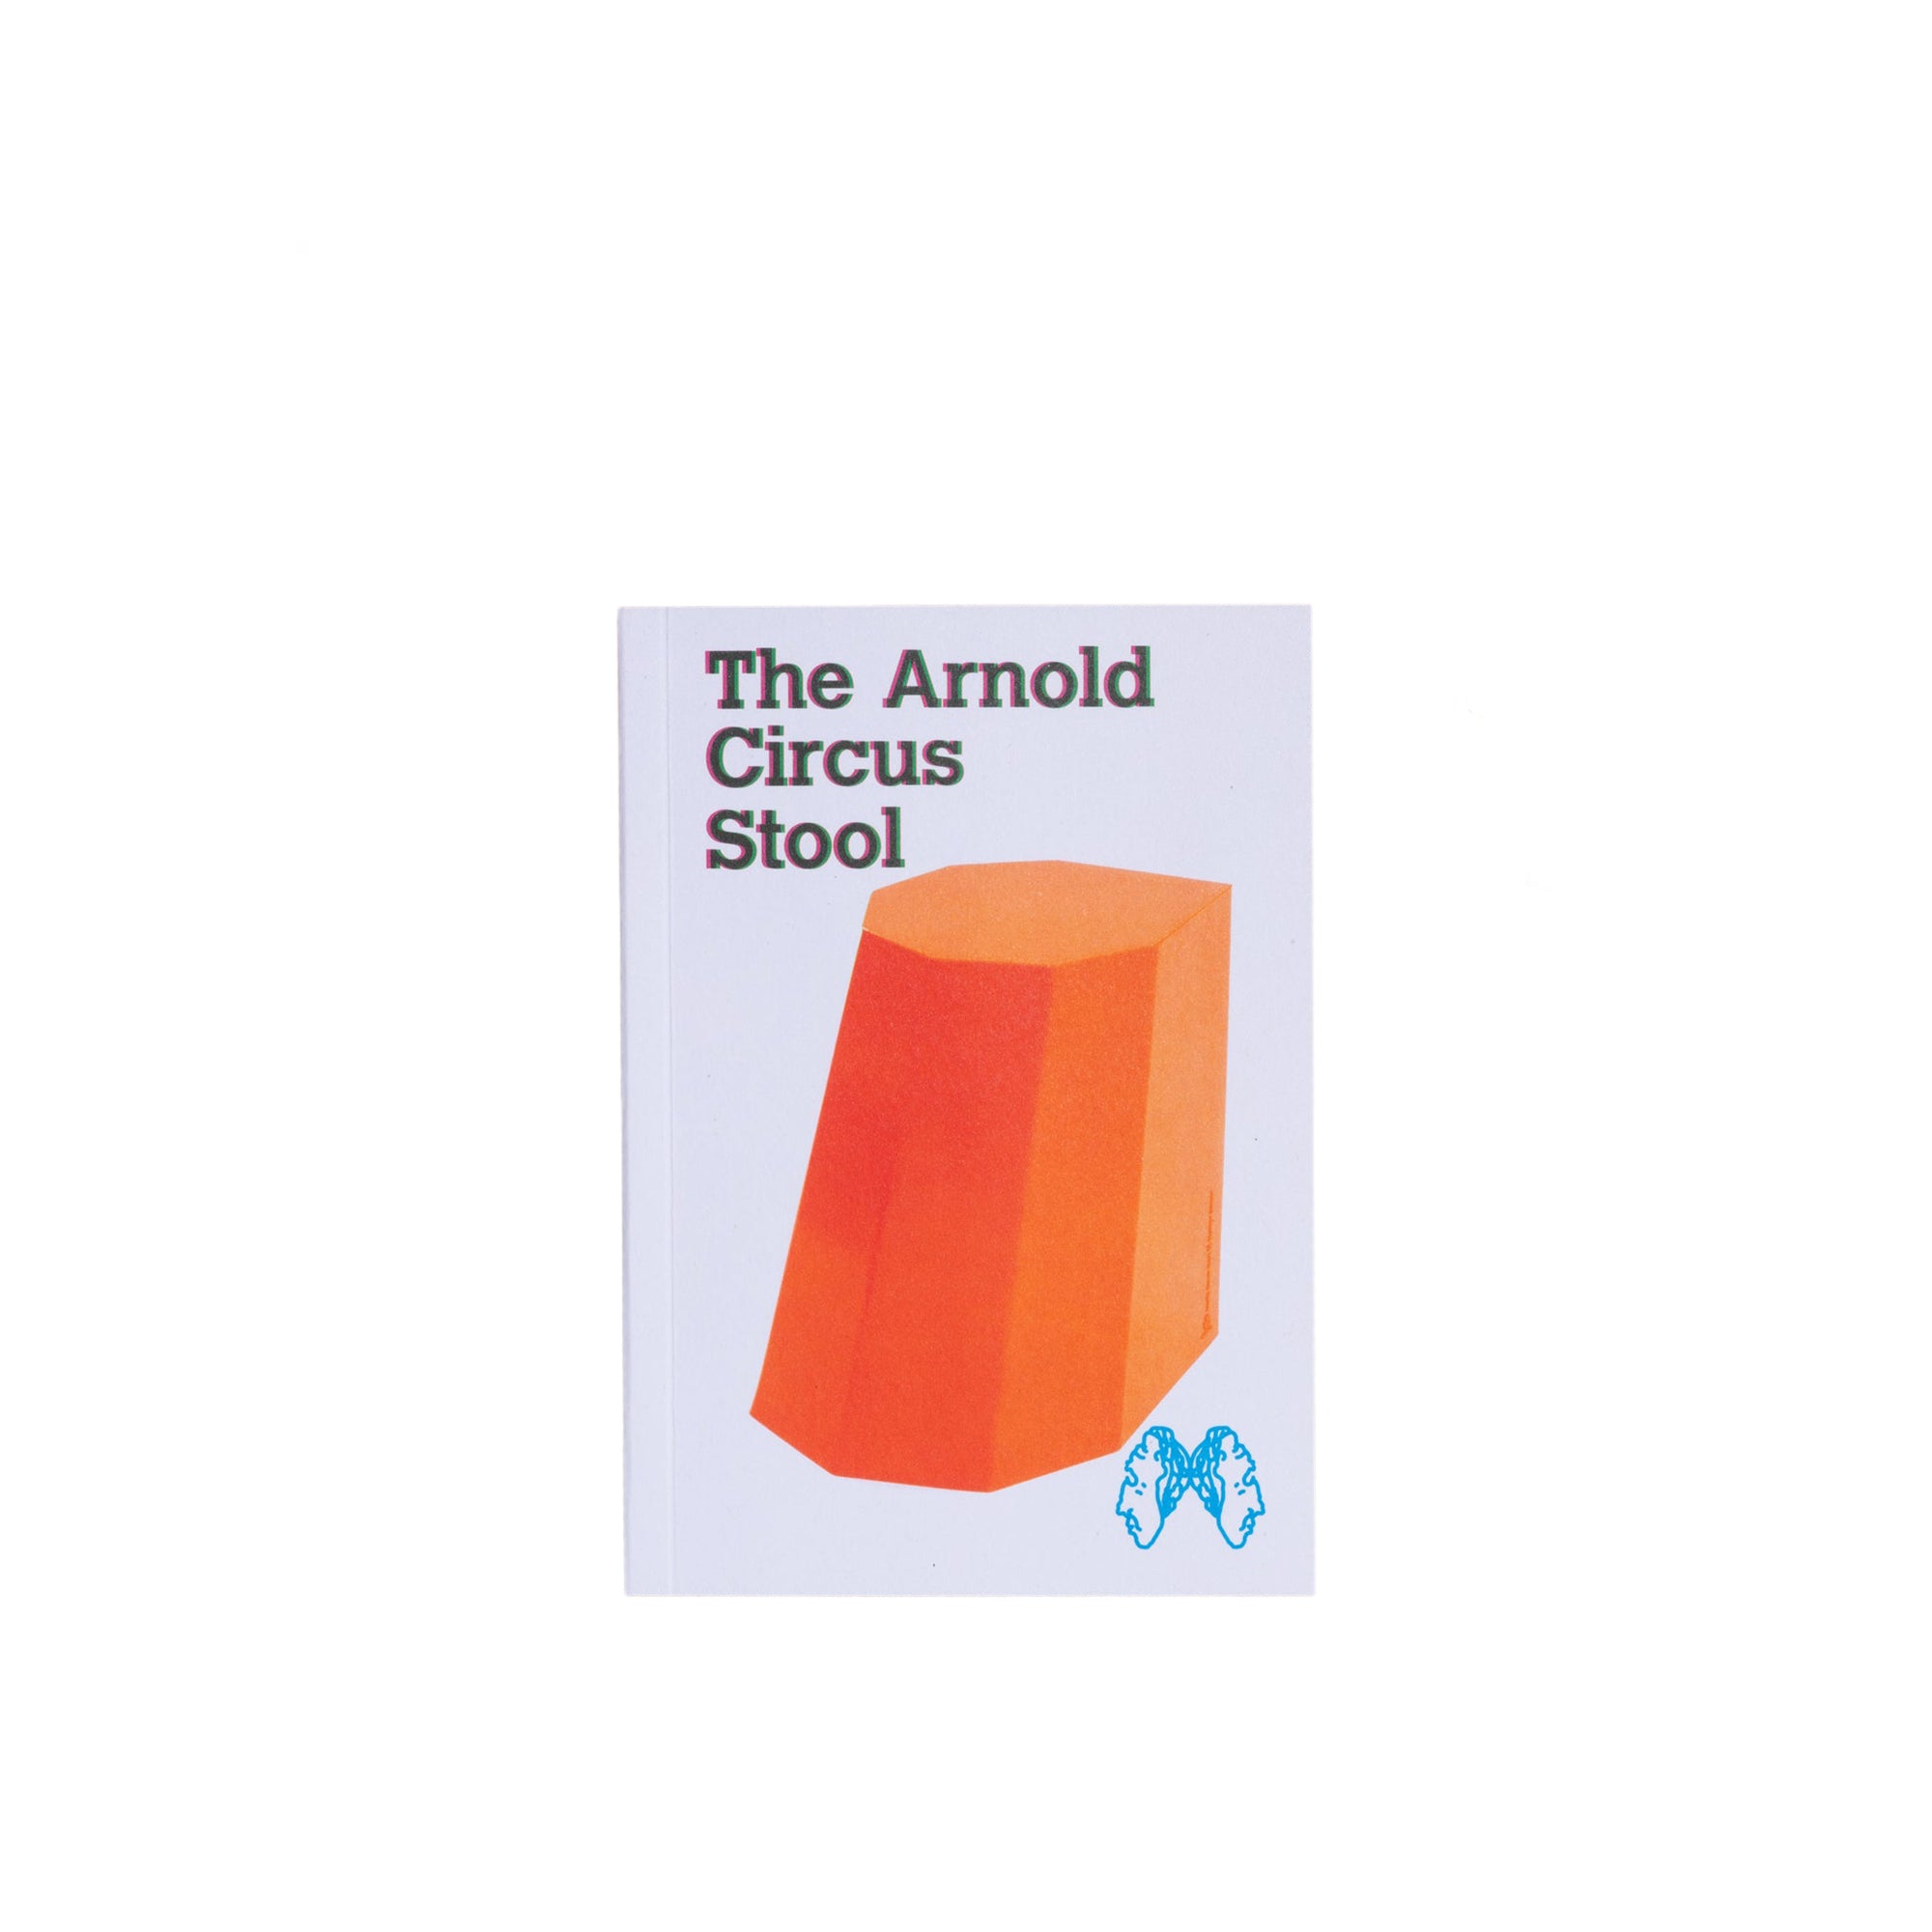 The Arnold Stool Book